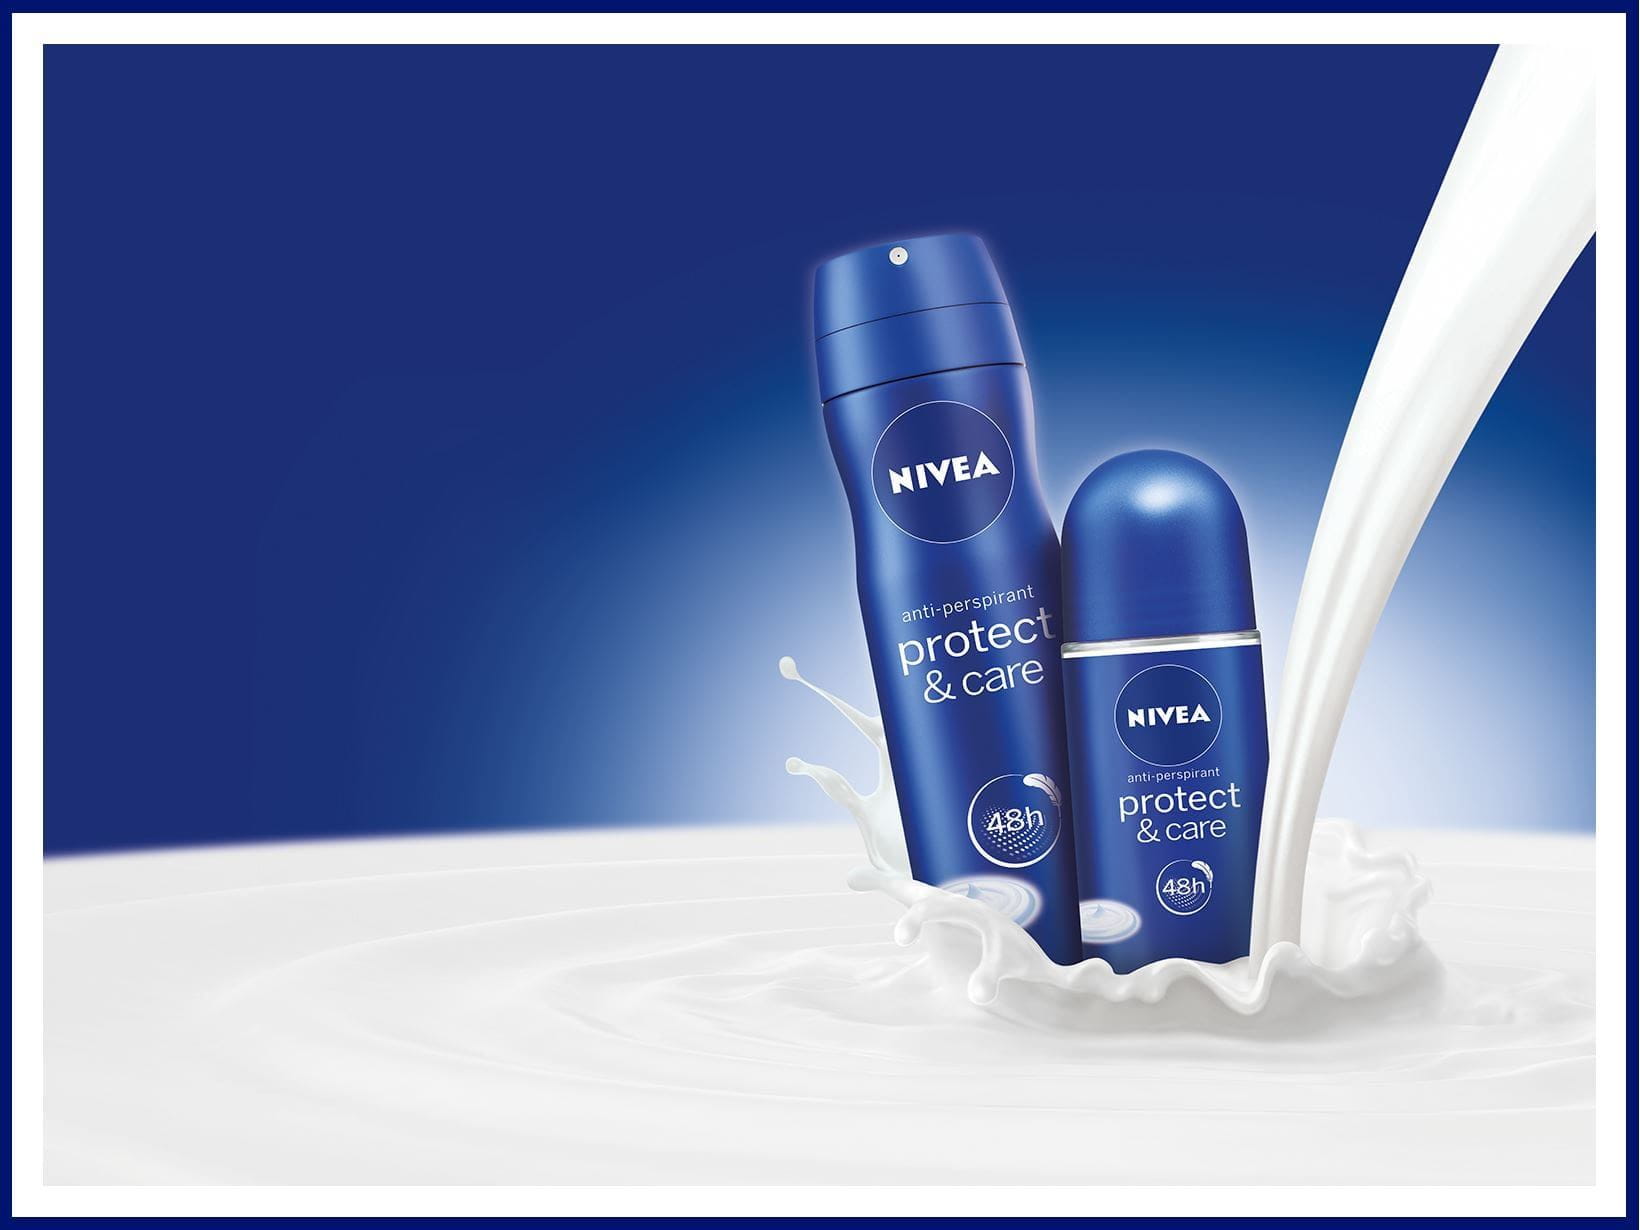 NIVEA protect and care products